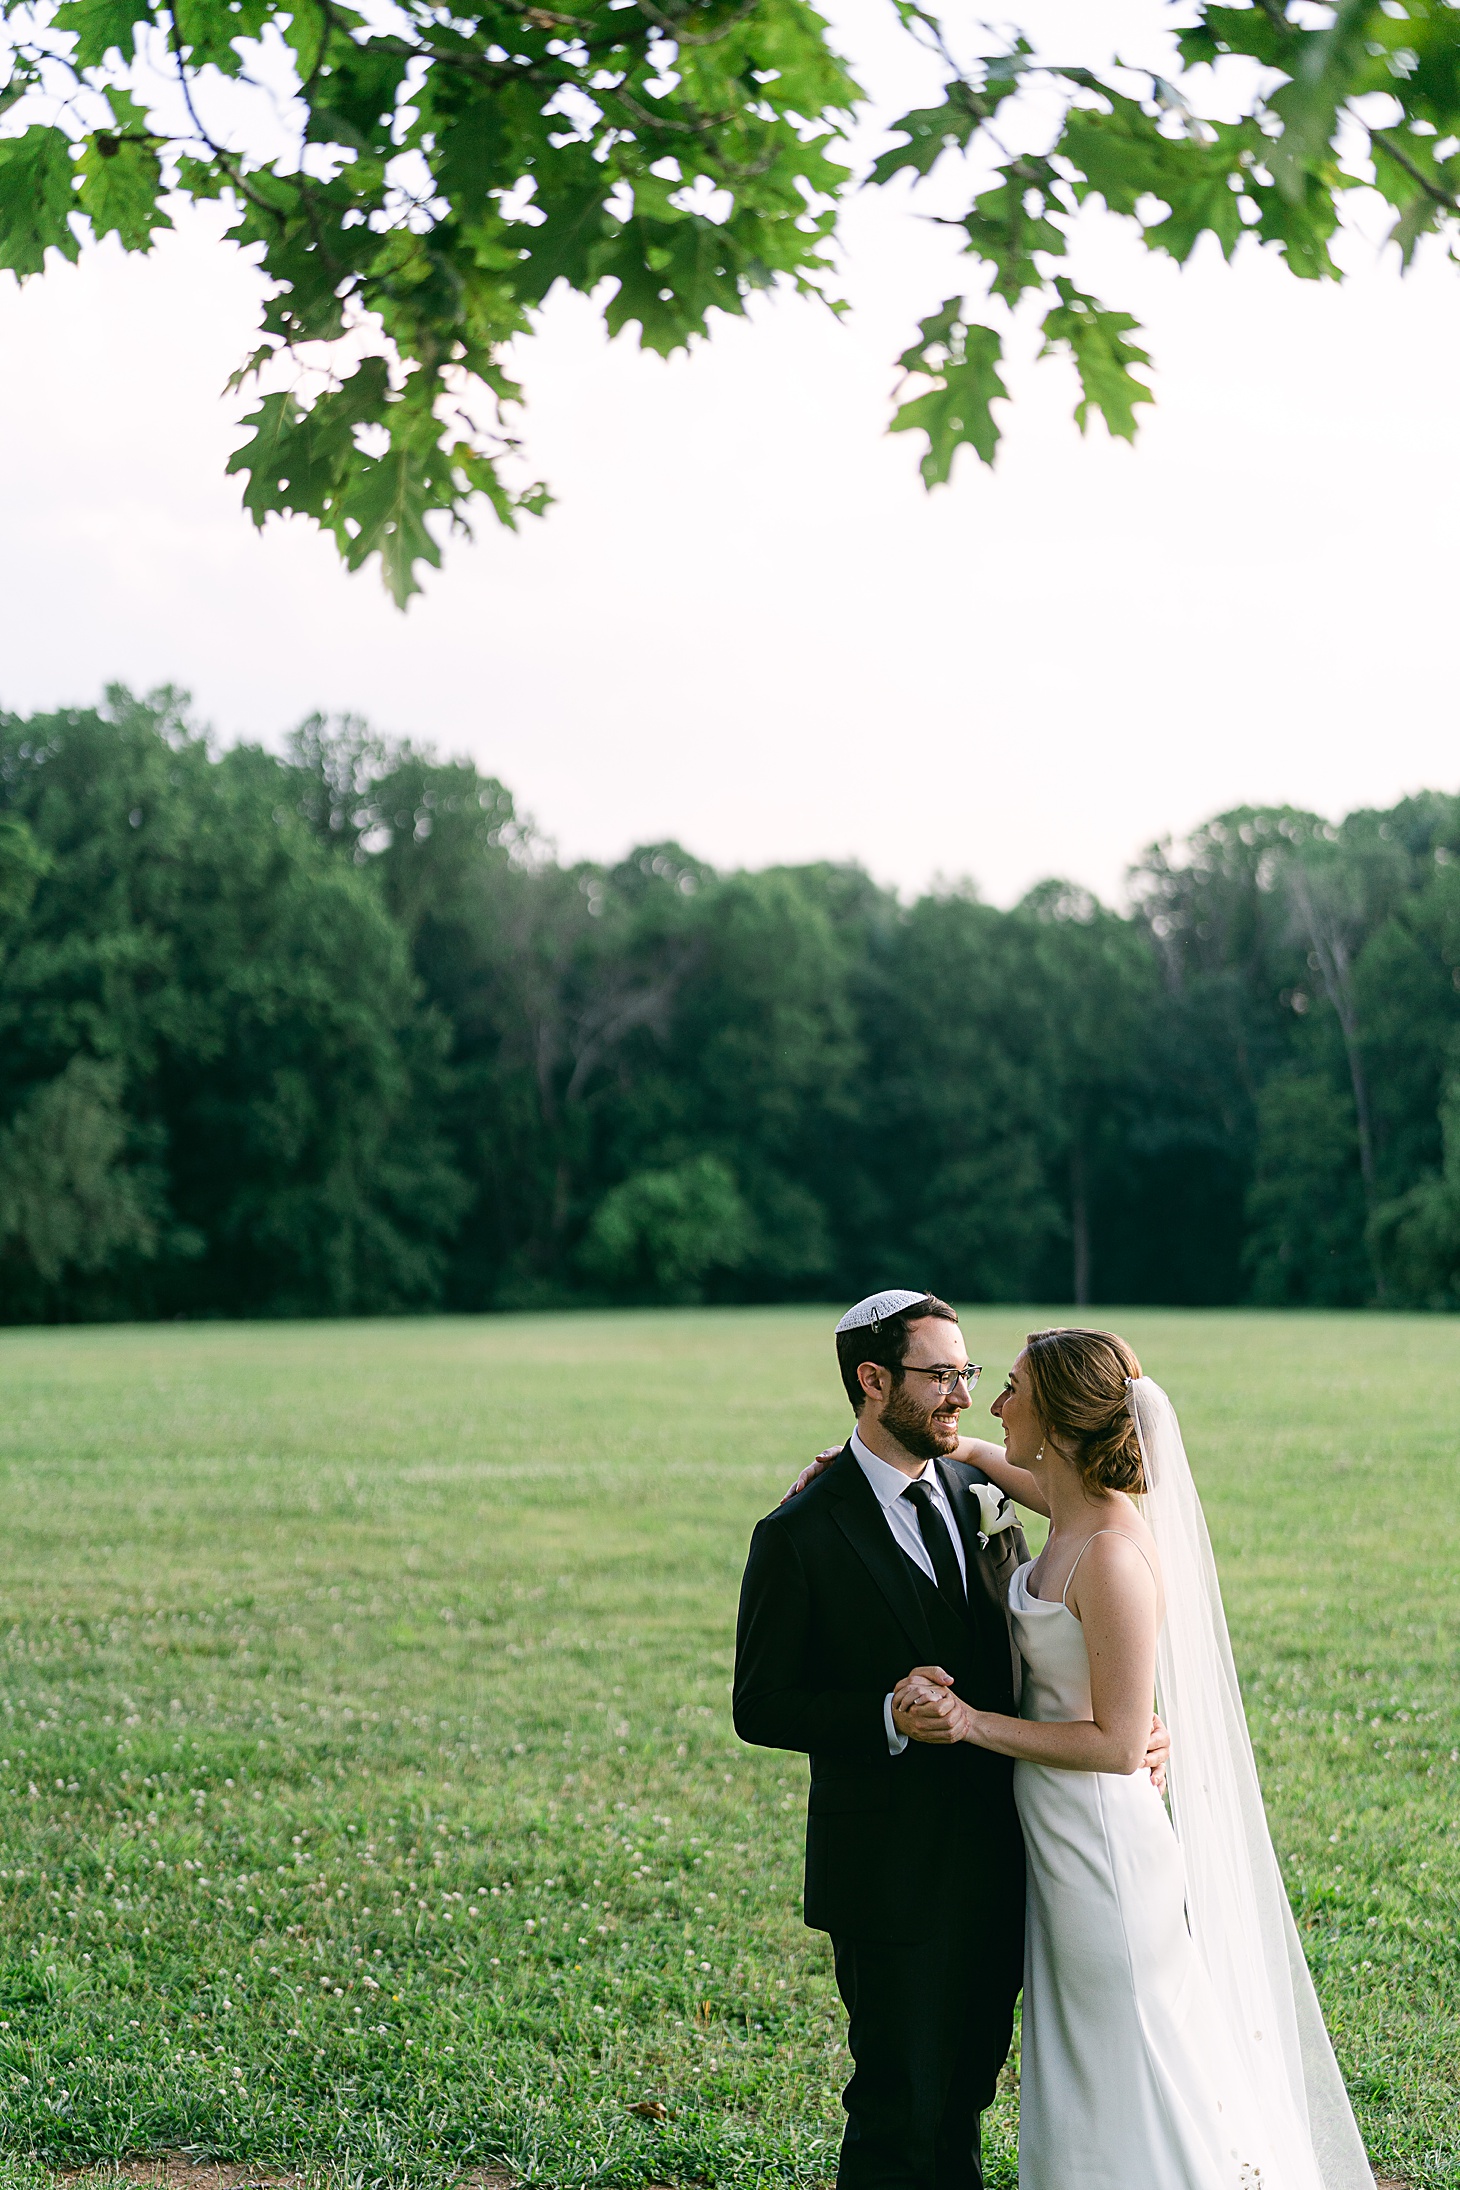 Just married portrait  | Modern Music-Inspired Jewish Wedding at Private Estate by Sarah Bradshaw